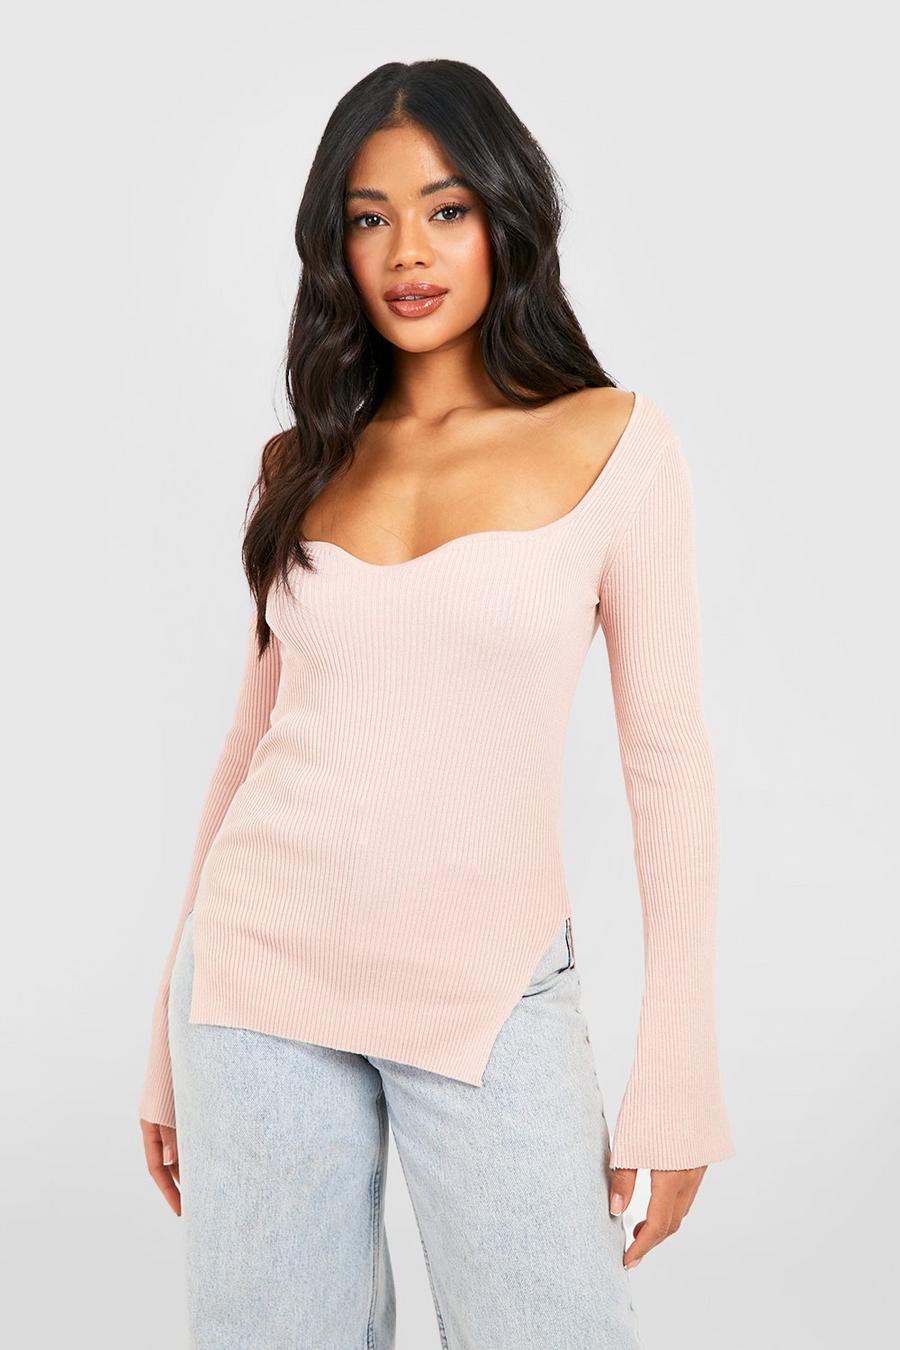 Nude Sweetheart Neckline Rib Knit Top image number 1